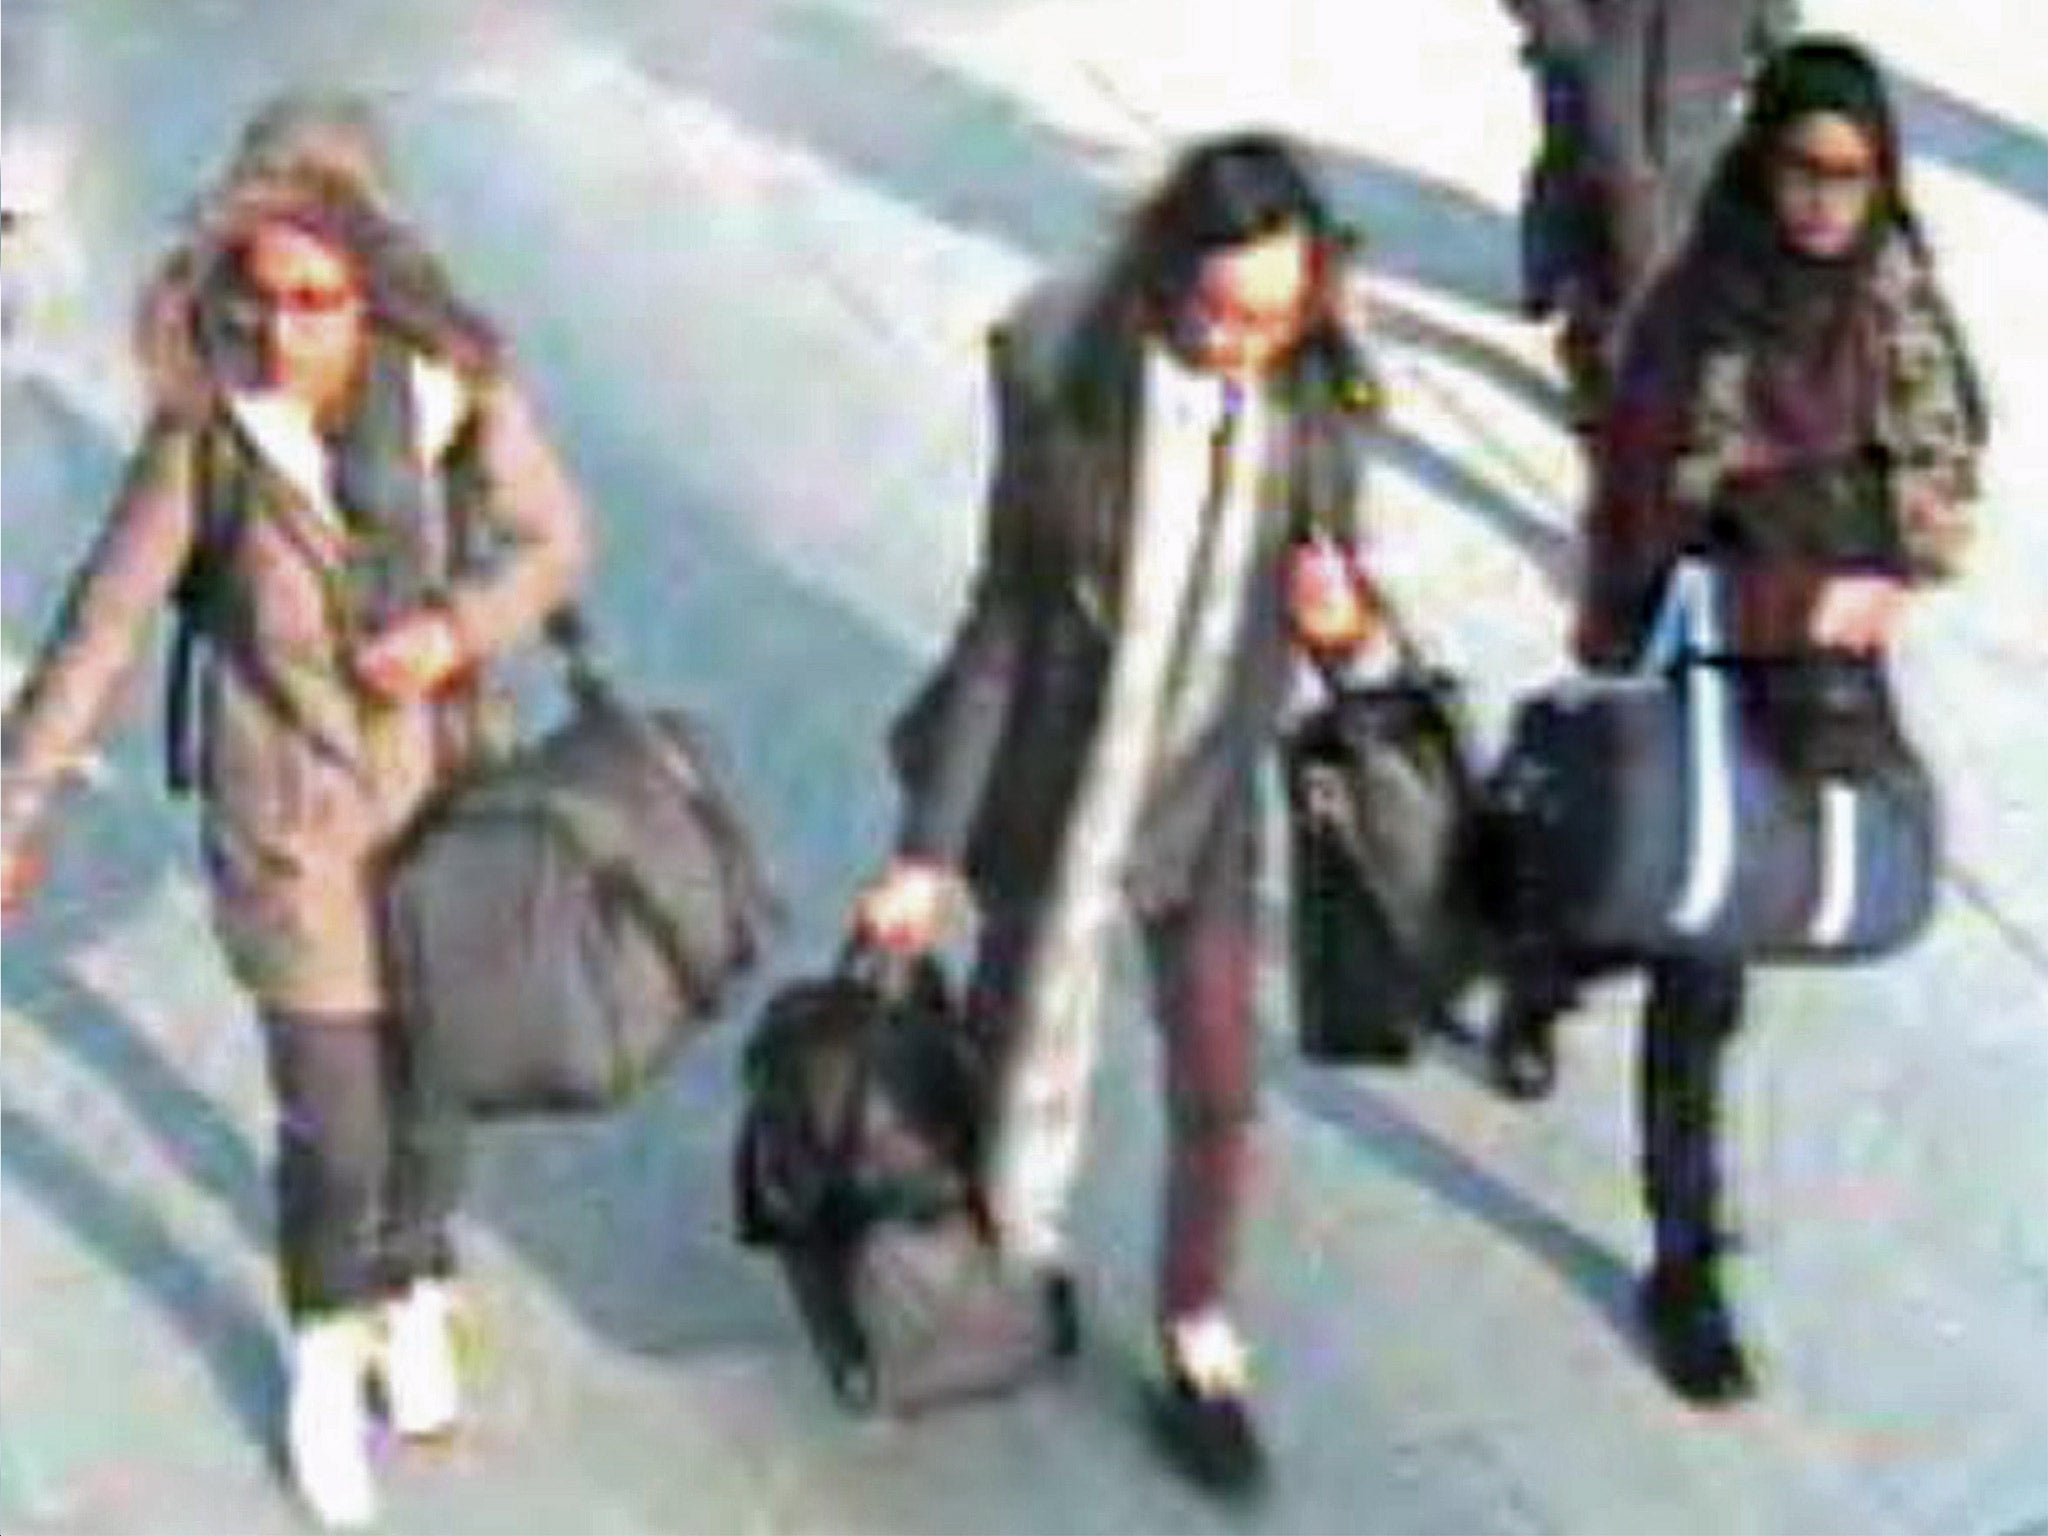 Left to right: Amira Abase, Kadiza Sultana and Shamima Begum waught on CCTV at Gatwick airport on their way to Turkey last month